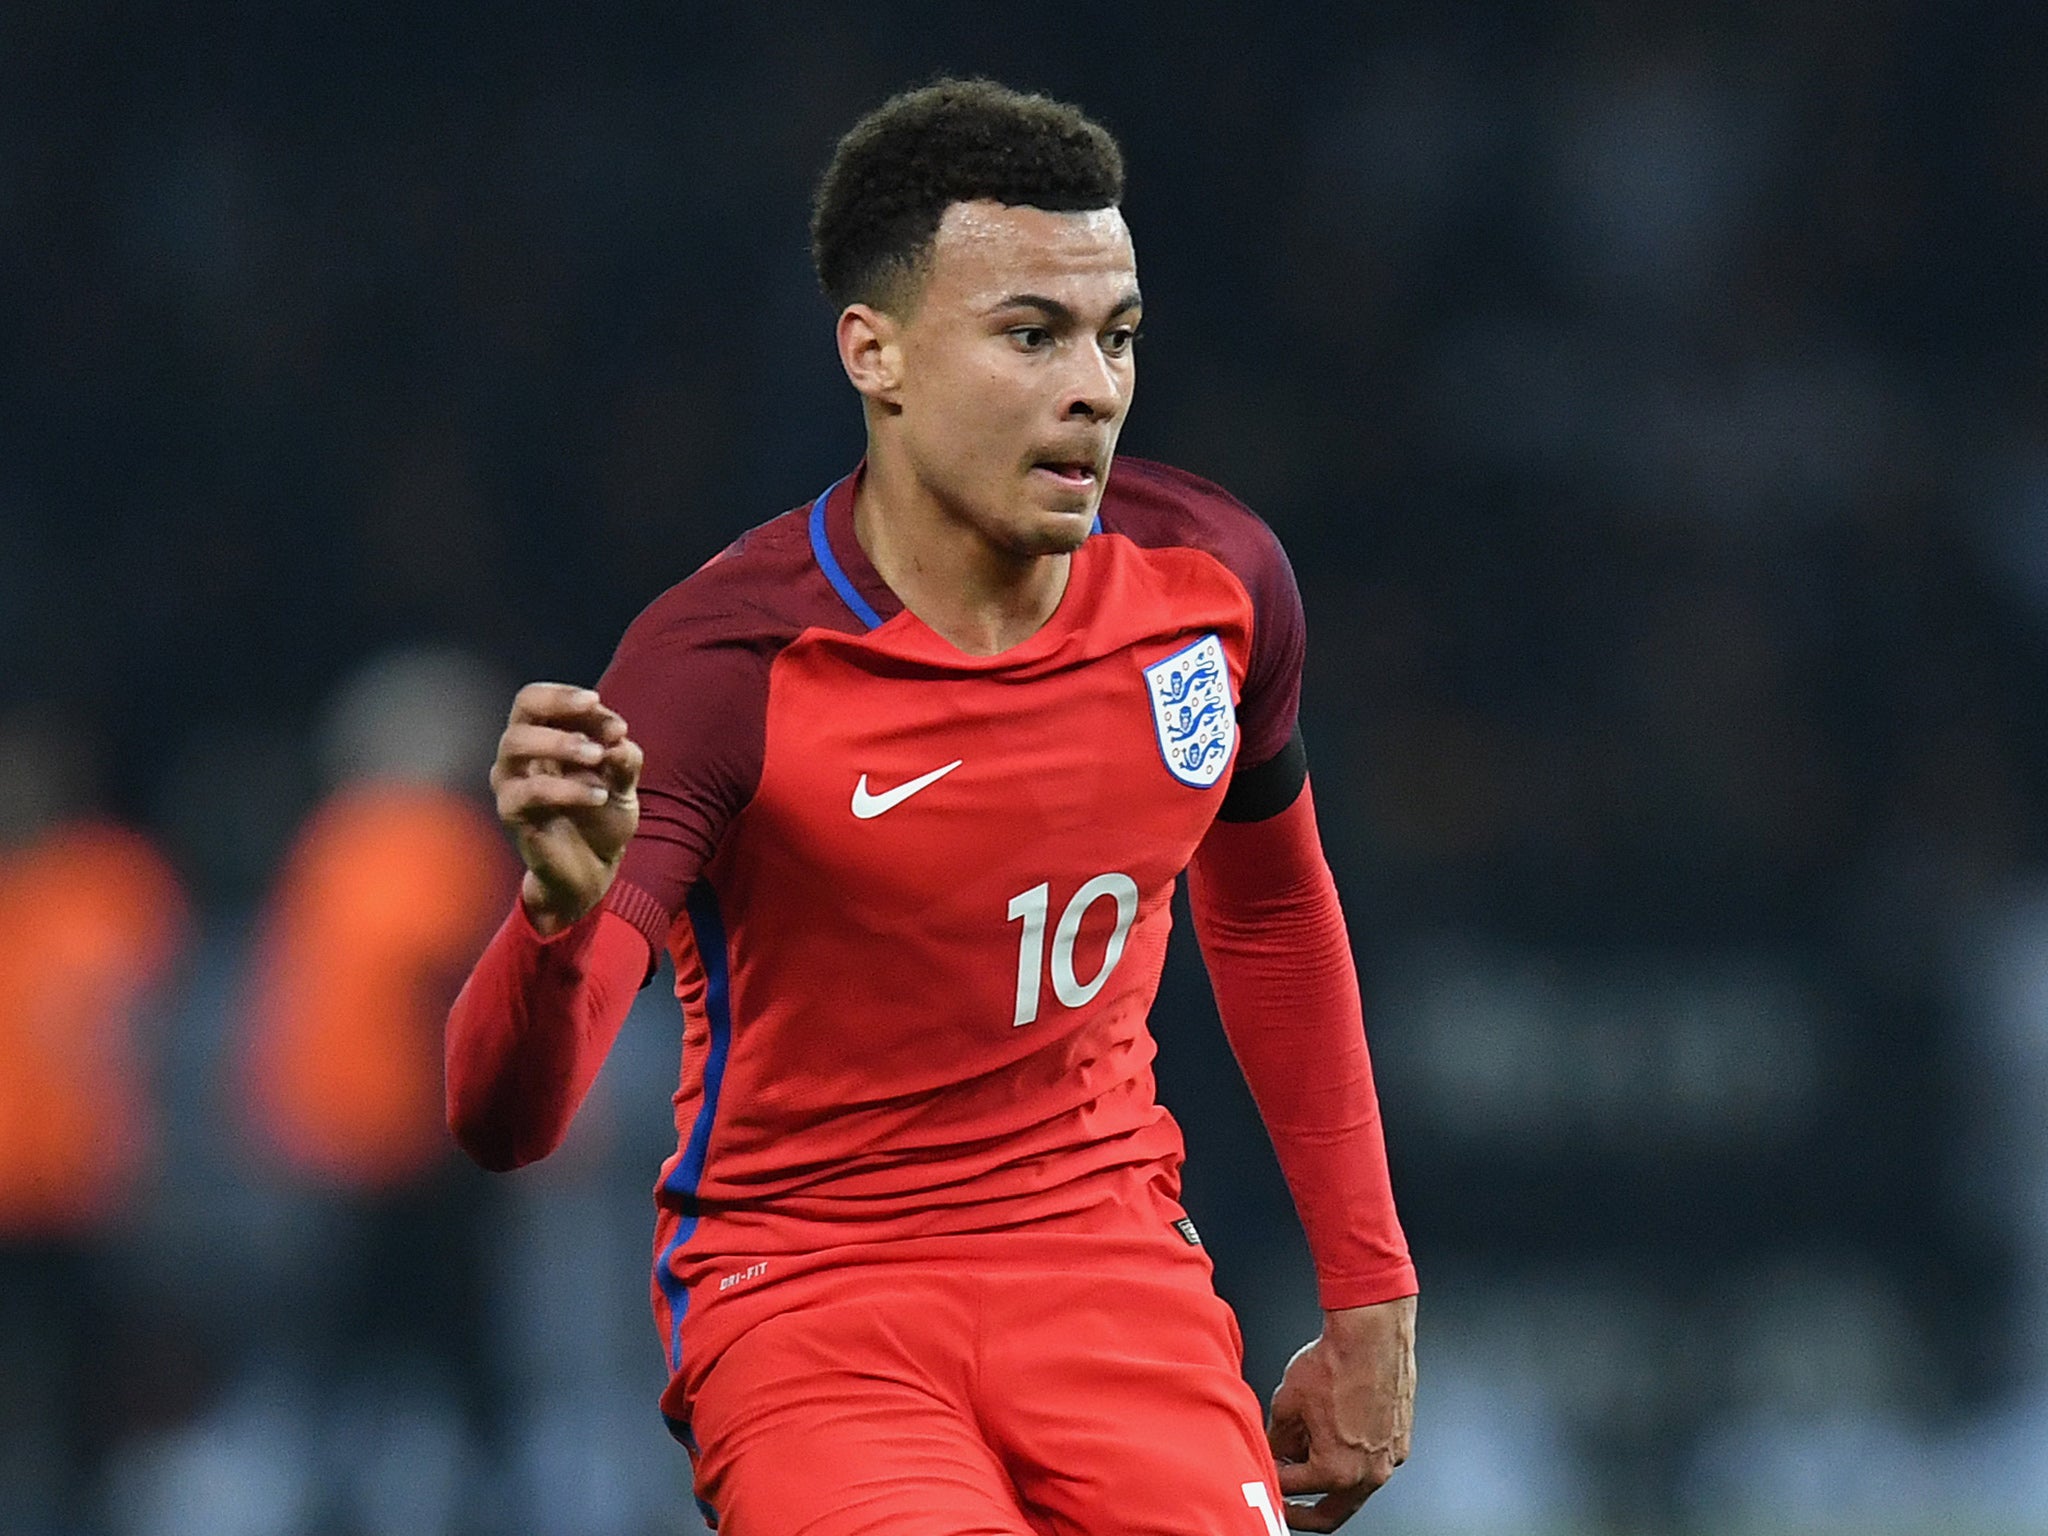 Tottenham's Dele Alli in action for England